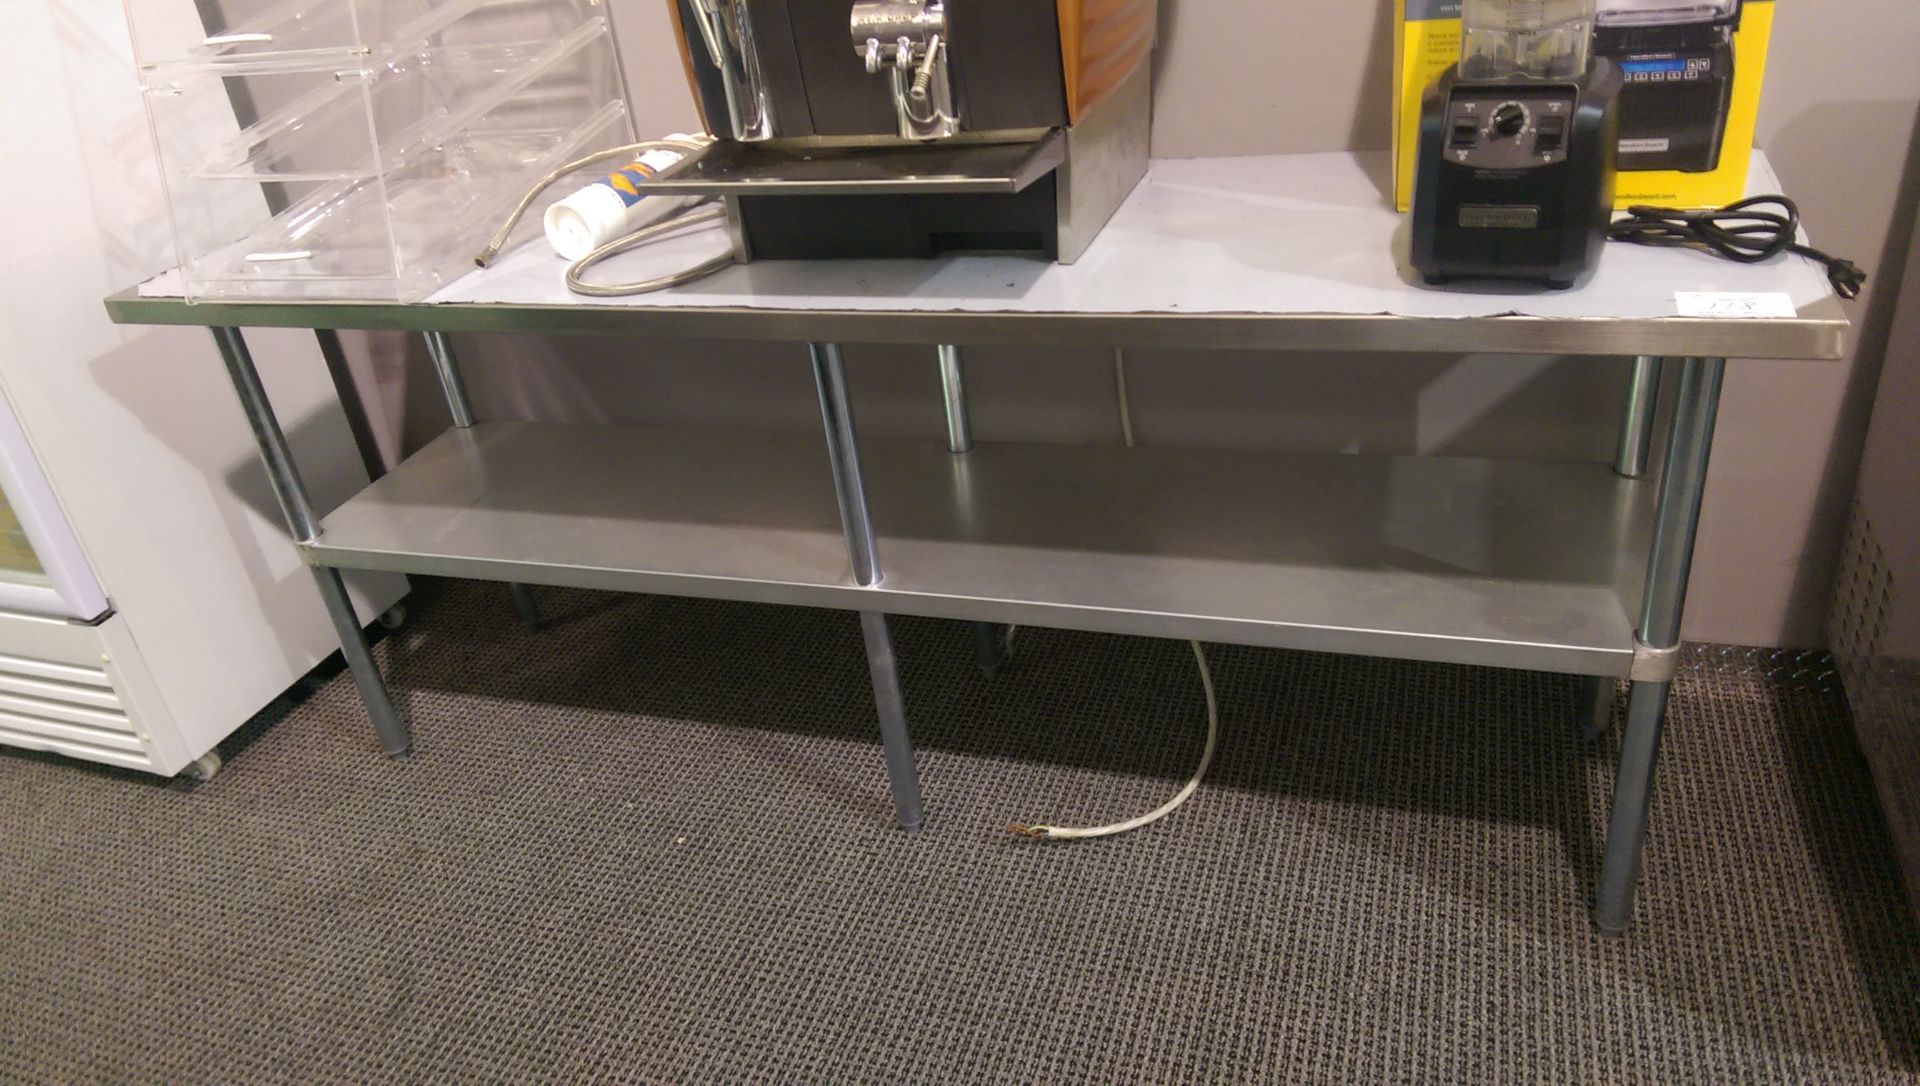 24 x 84" New 2 Tier Stainless Steel Work Table